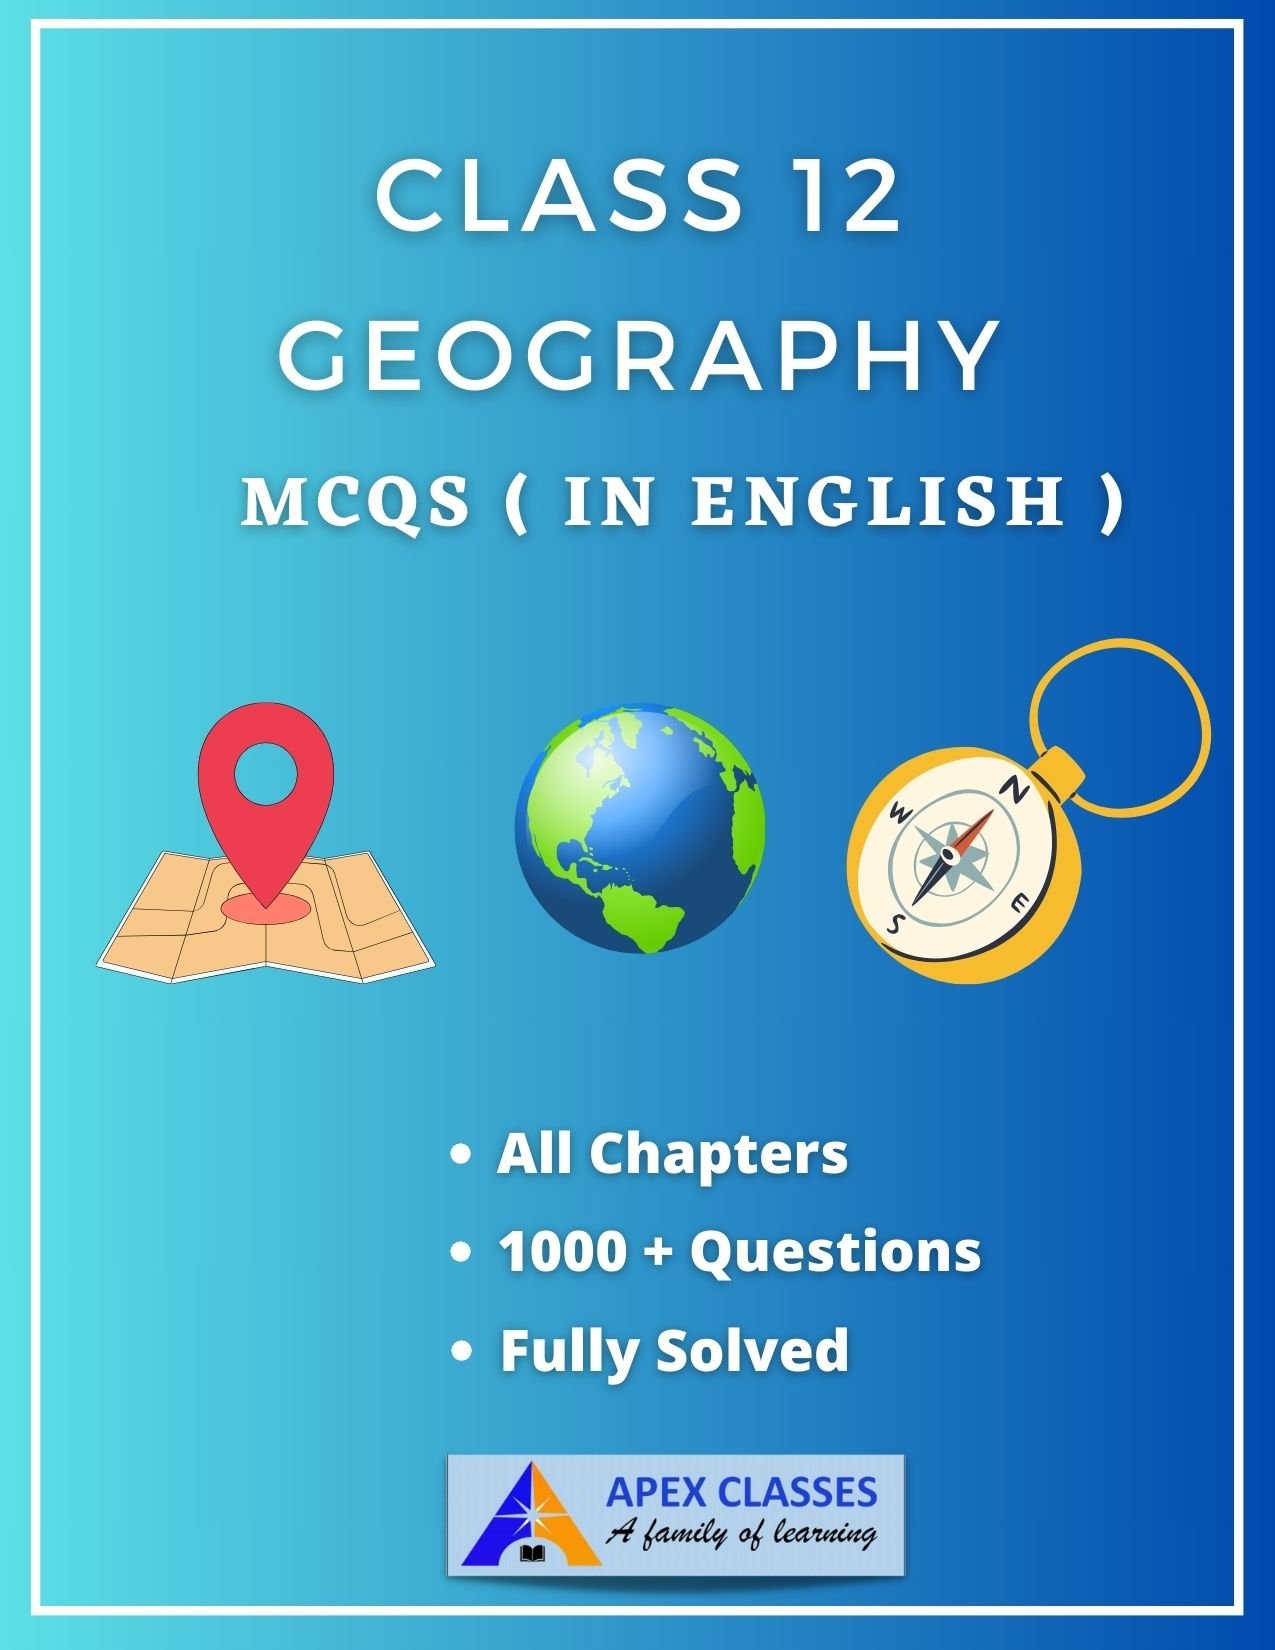 Class 12 Geography MCQs pdf in English